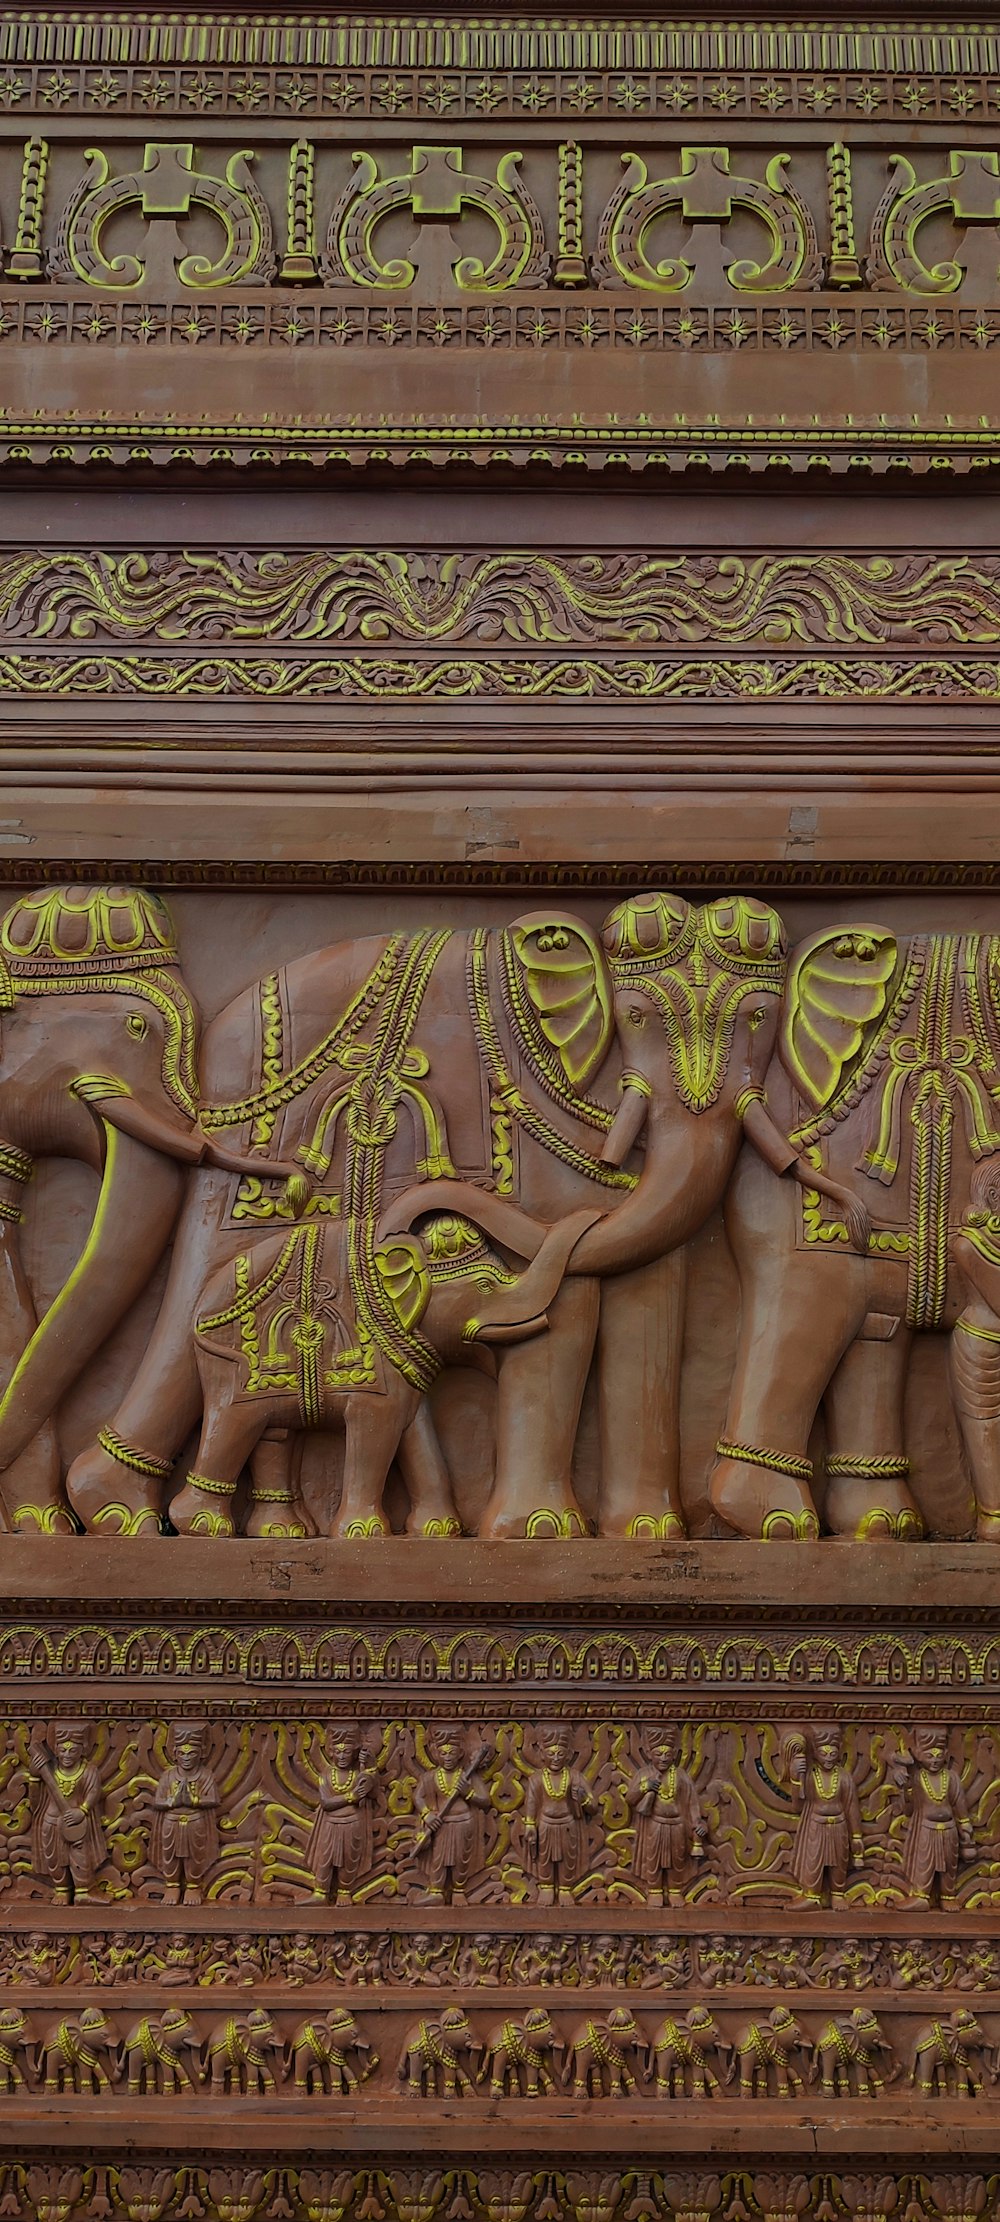 an intricately carved wooden carving of elephants